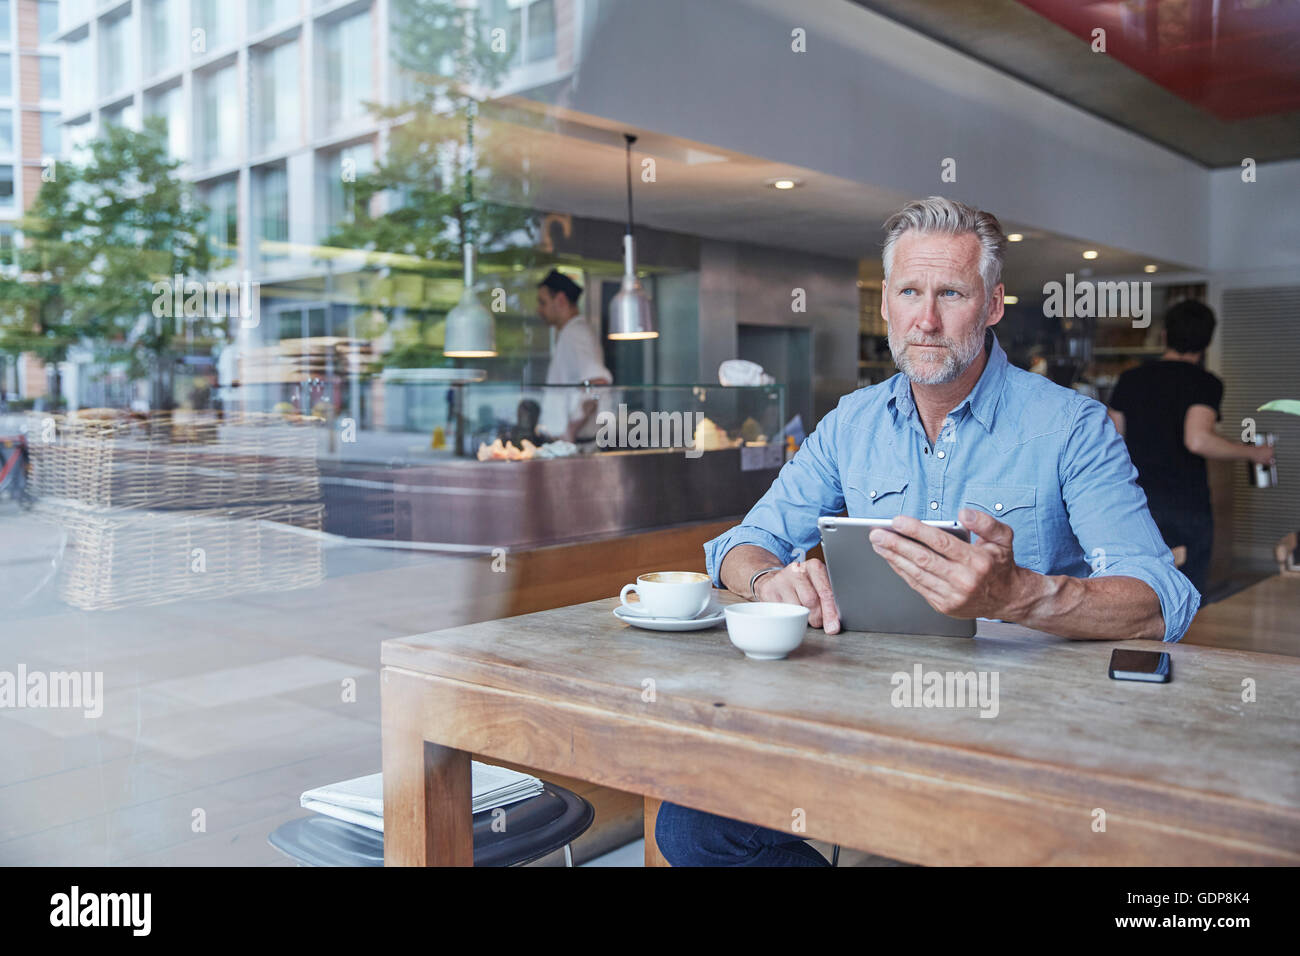 Mature man sitting in cafe, using digital tablet Stock Photo